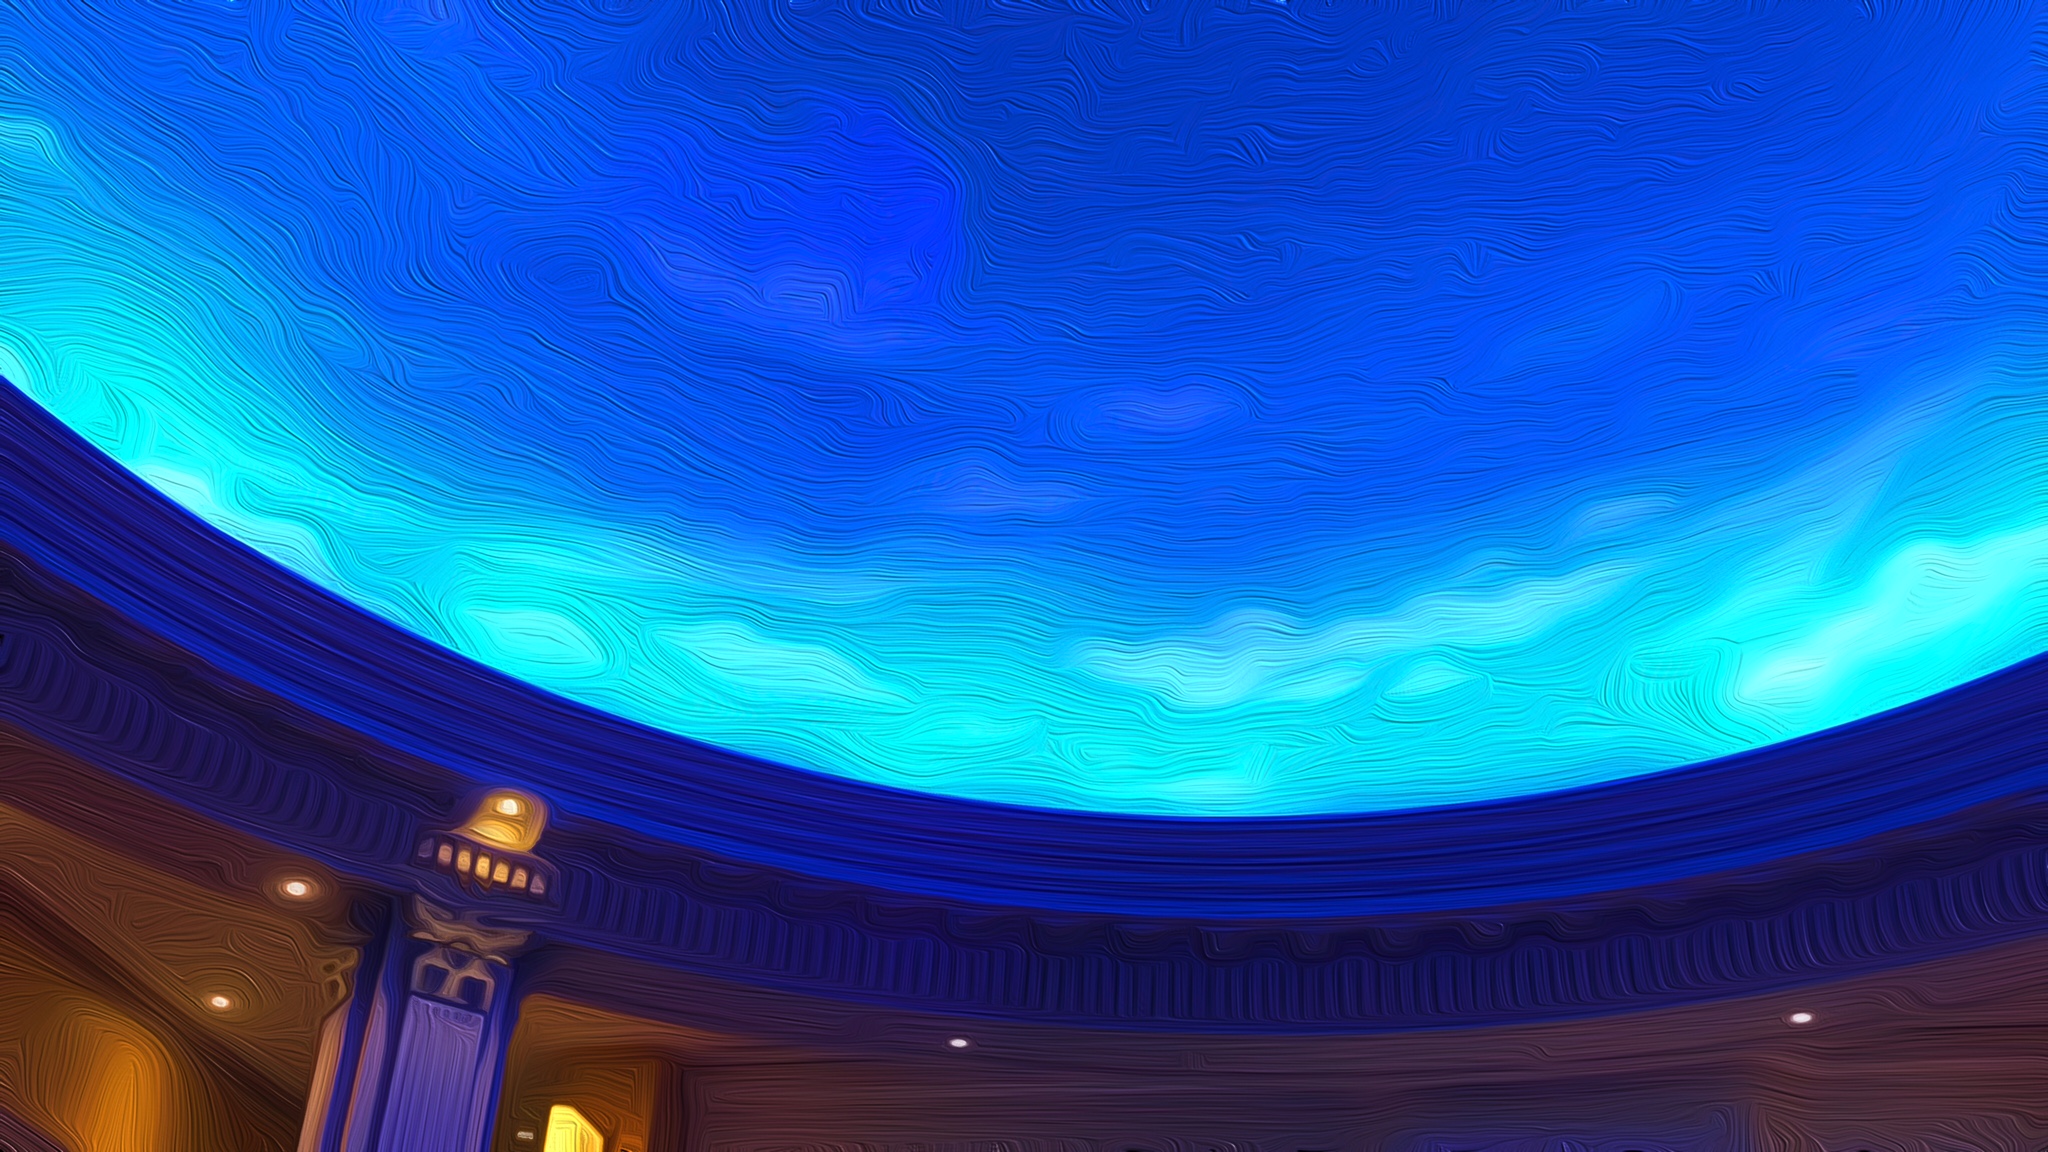 "BLUE SKY INSIDE THE FORUM SHOPS AT CEASAR’S PALACE" [Created: 1/25/2021]